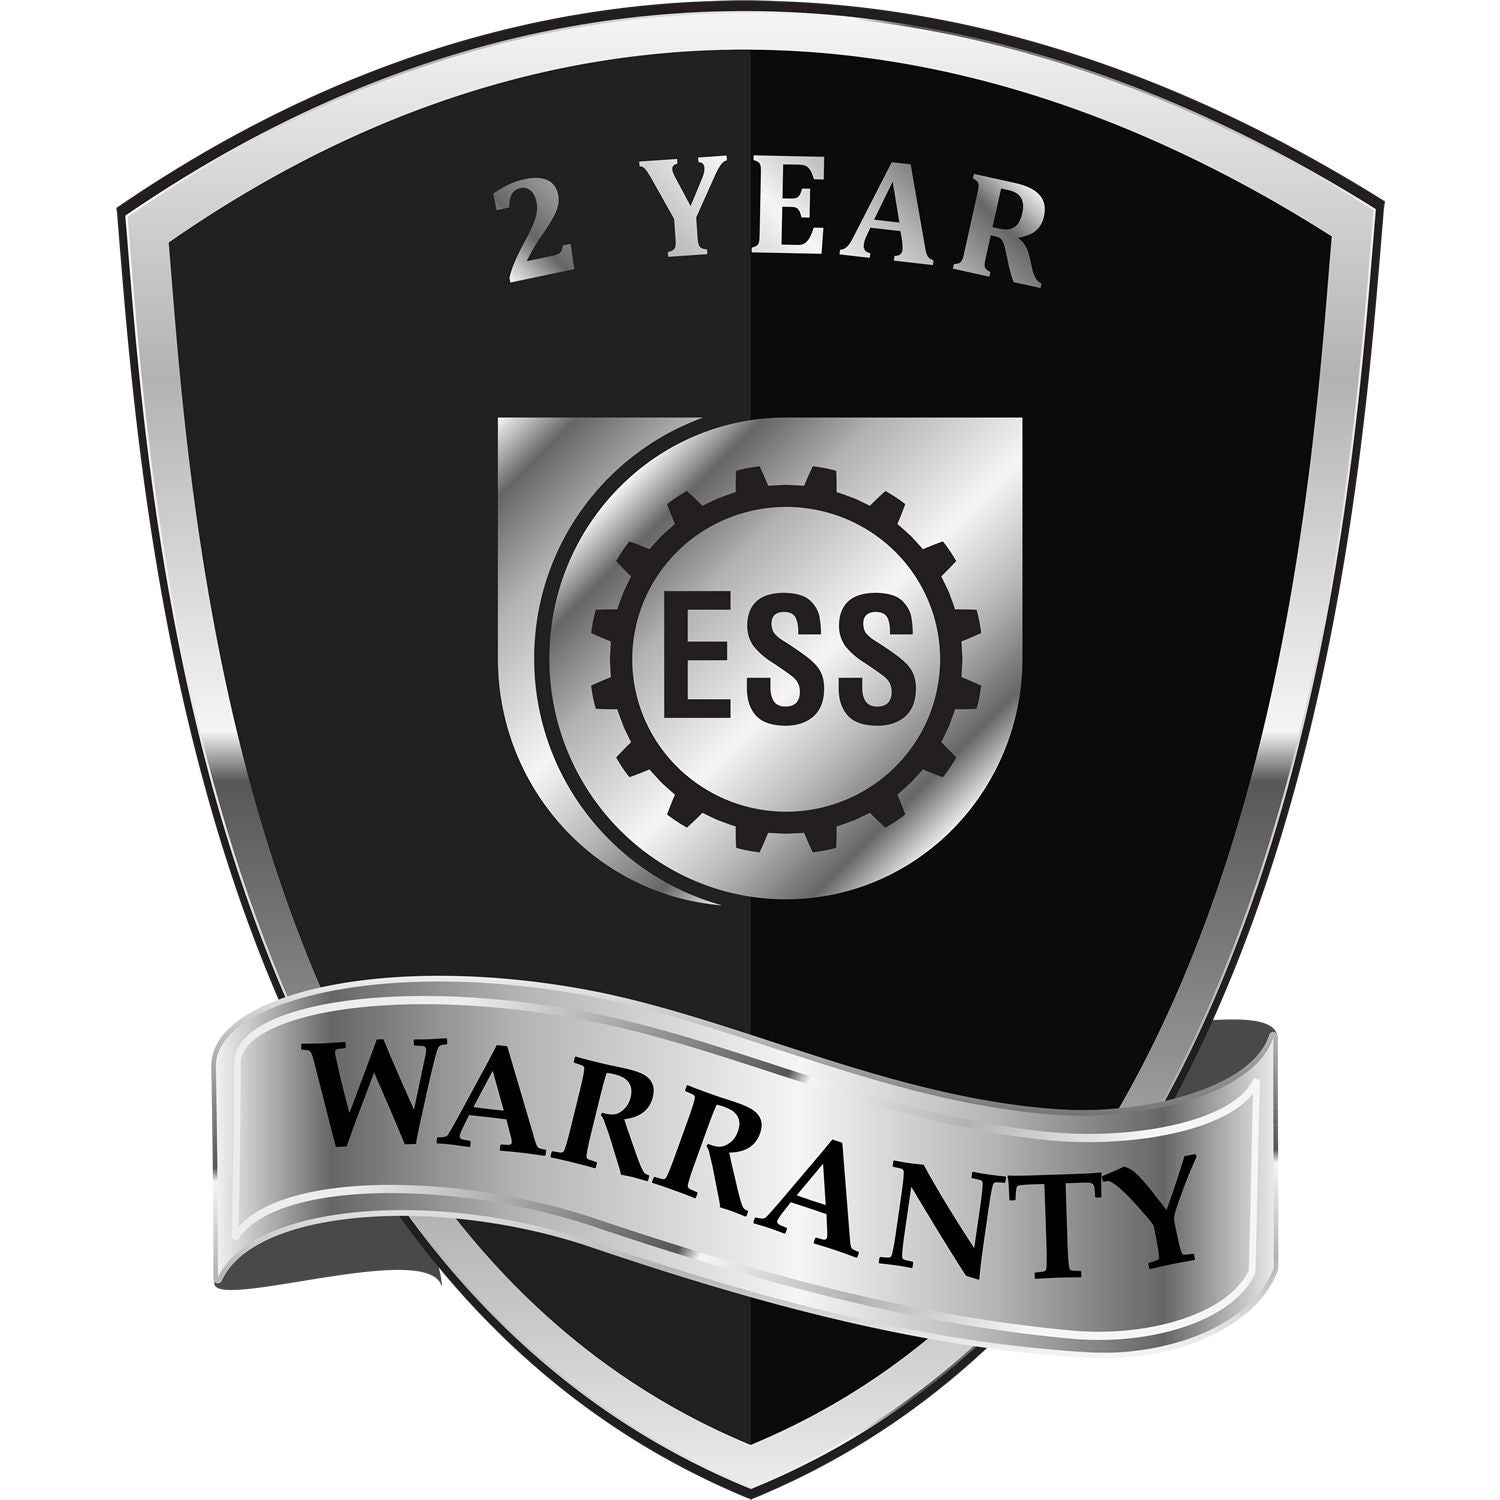 A badge or emblem showing a warranty icon for the Soft Puerto Rico Professional Engineer Seal